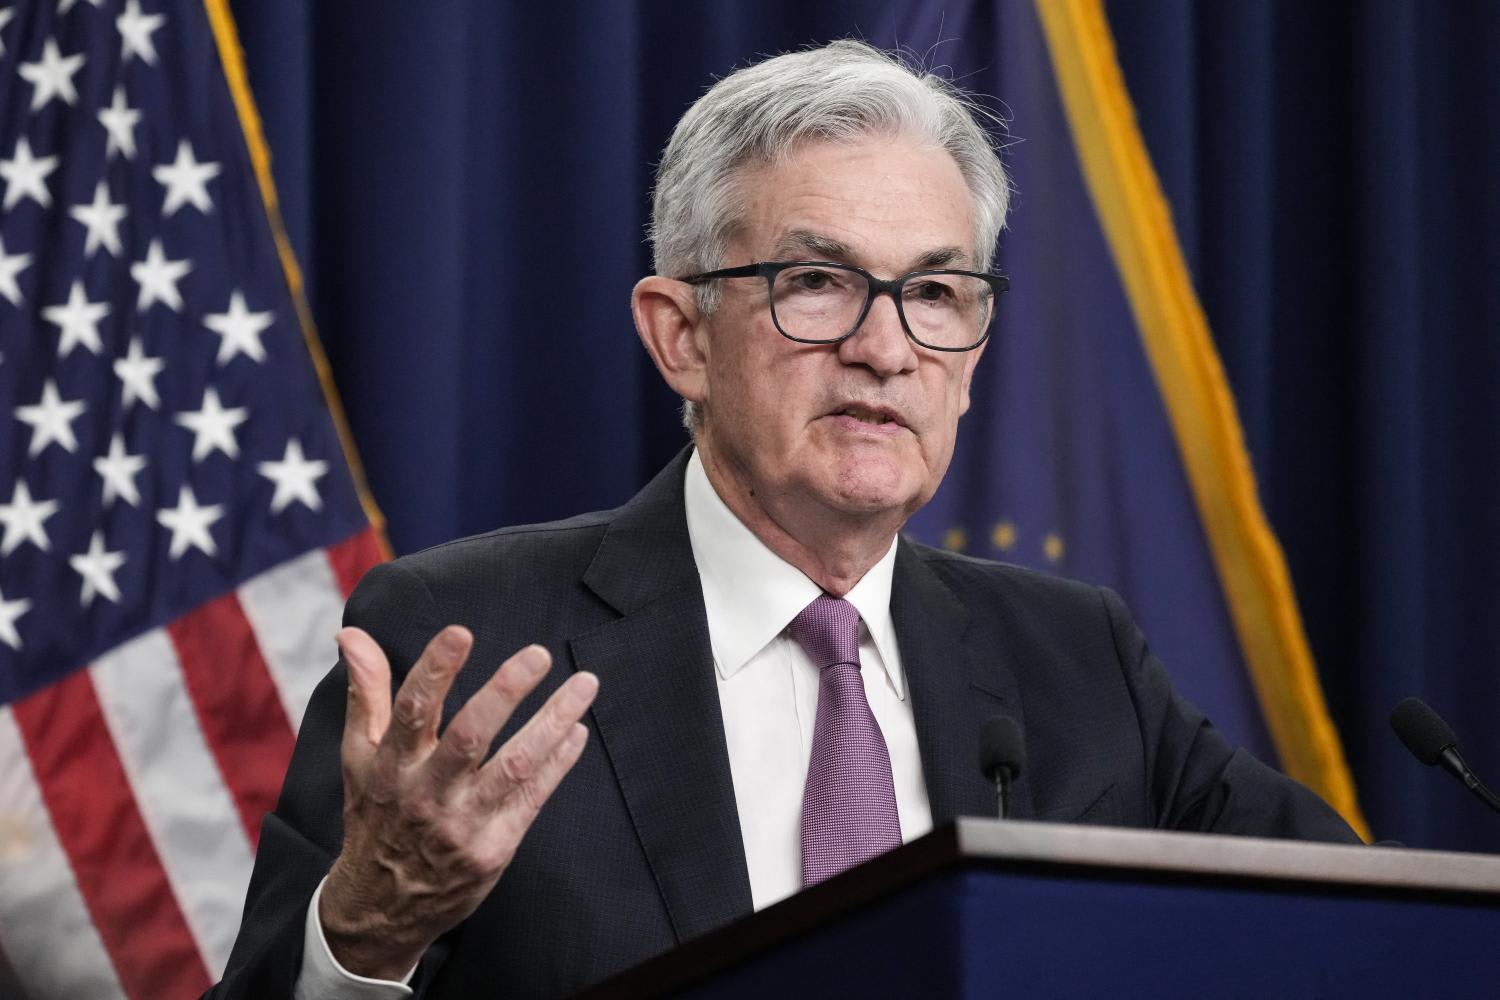 US Federal Reserve Board Chairman Jerome Powell speaks during a news conference at the headquarters of the Federal Reserve on July 27, 2022 in Washington.